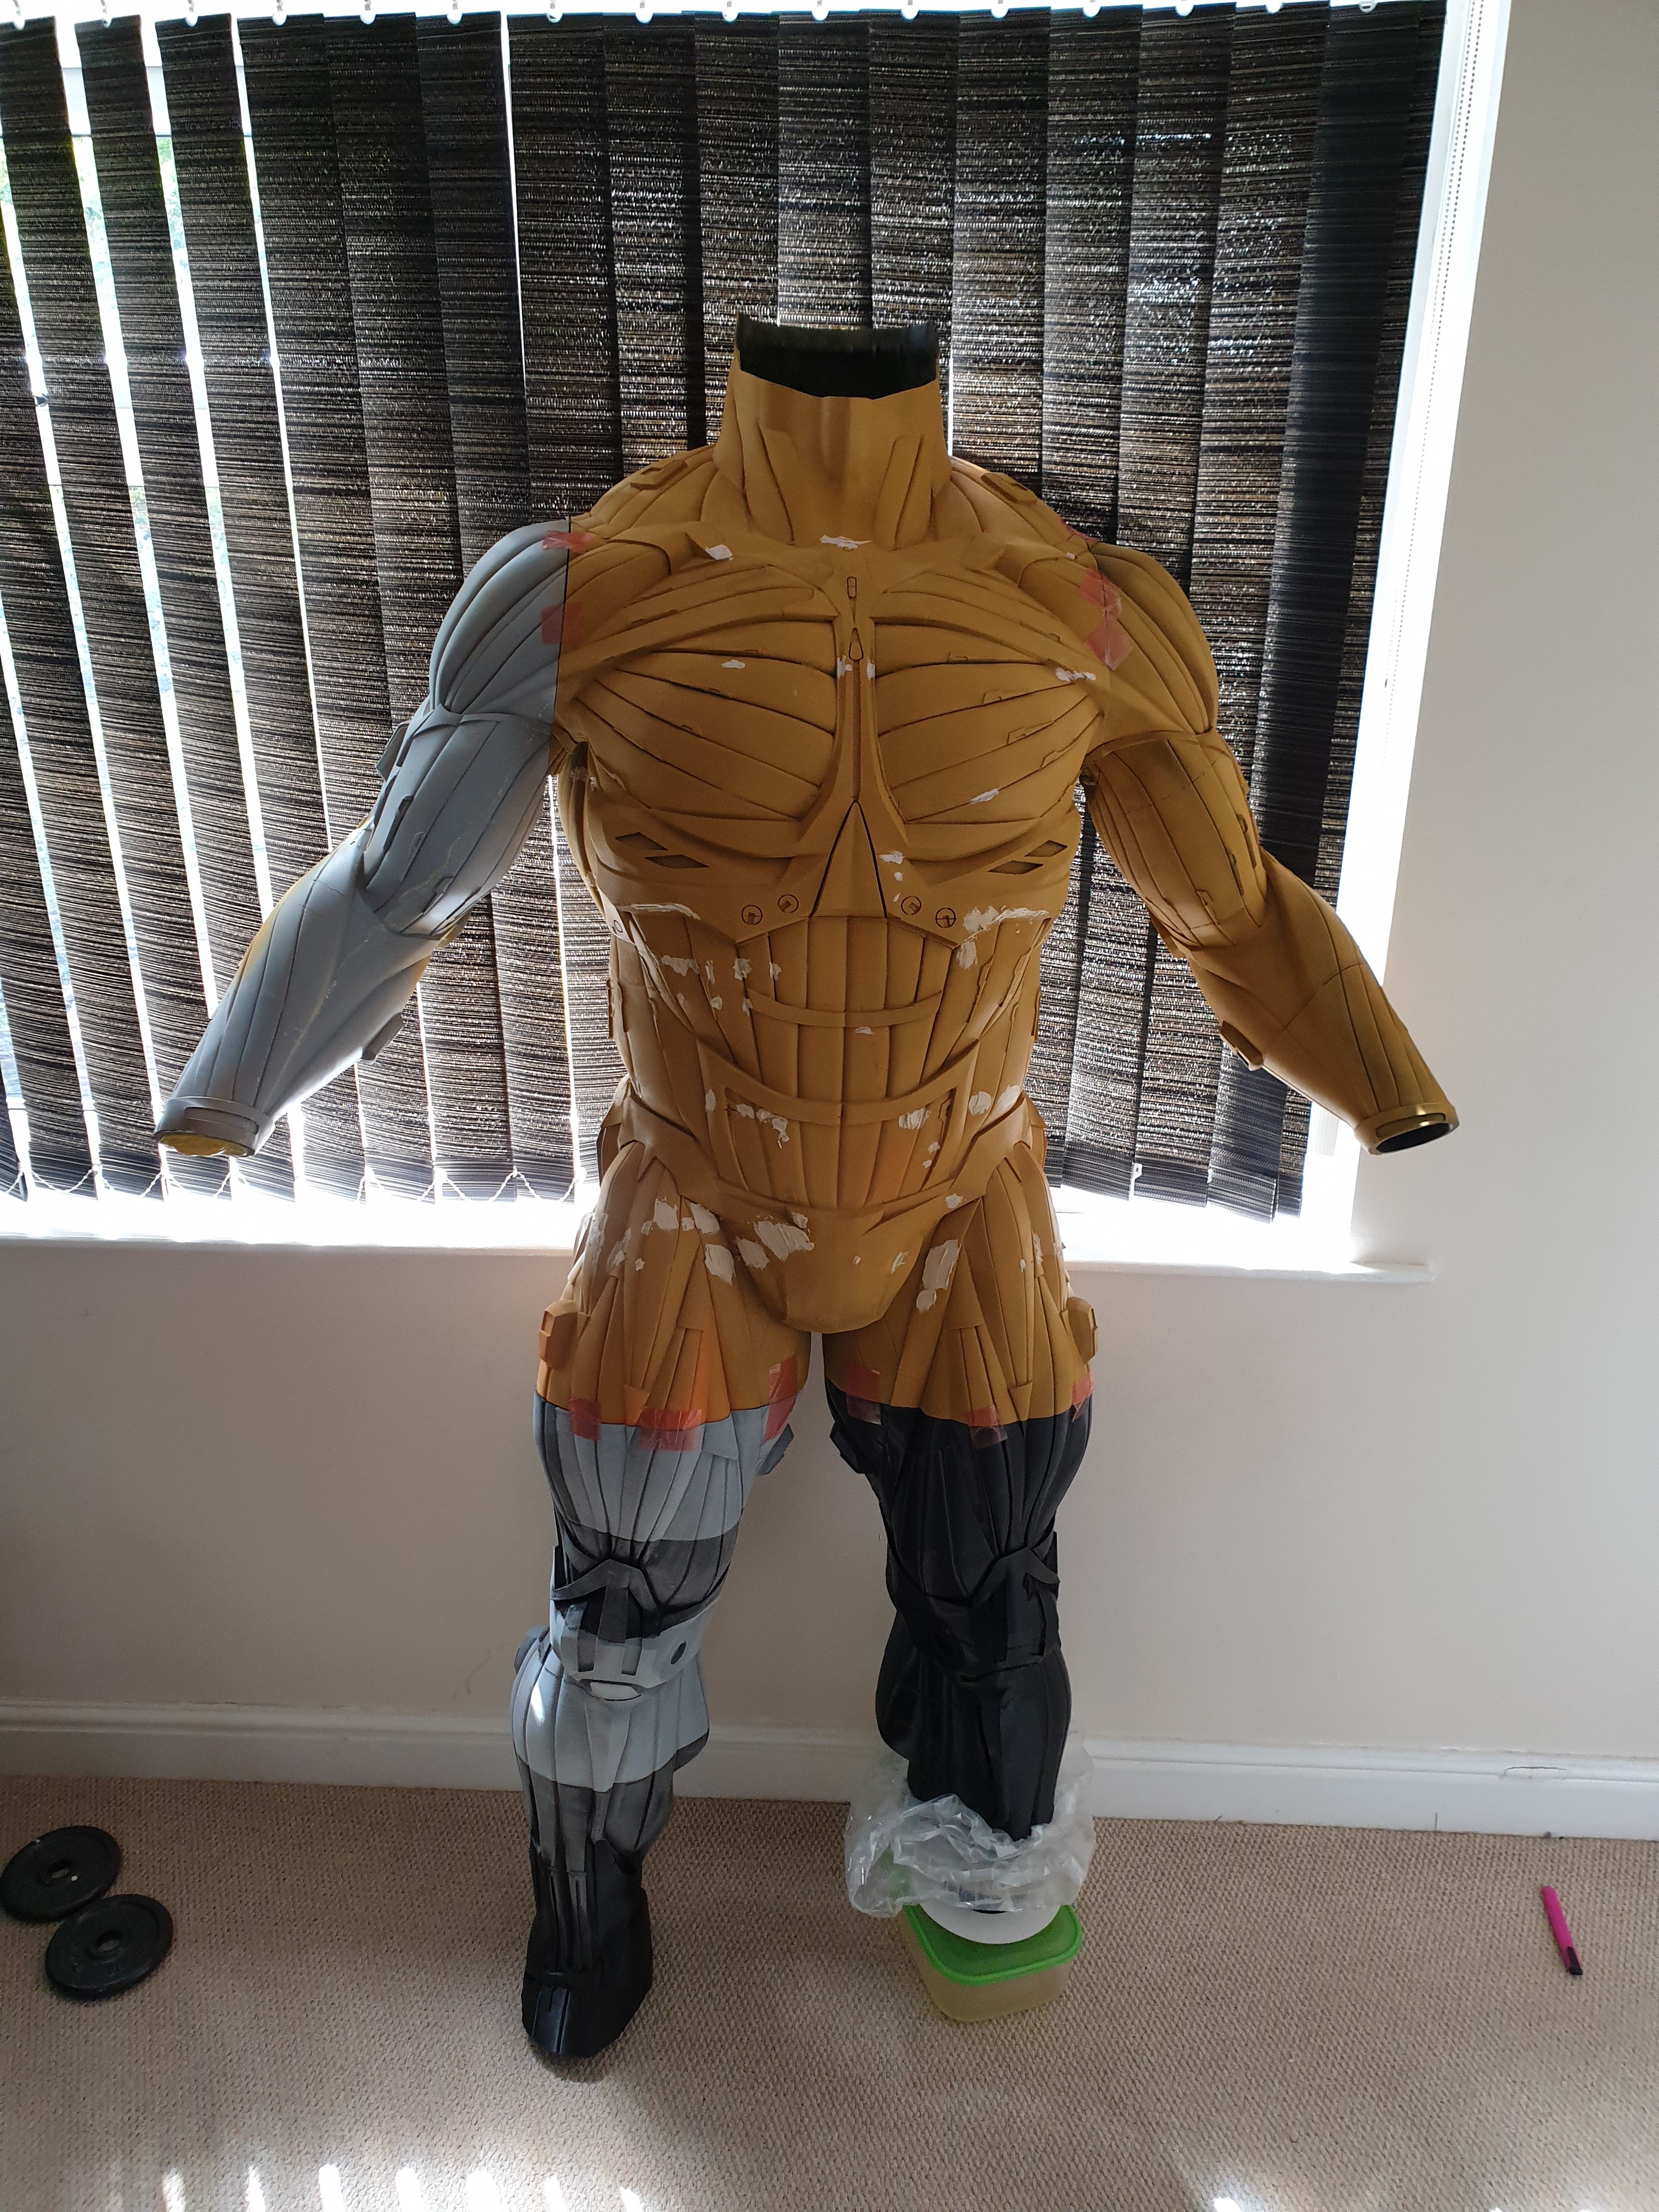 Crysis 3 Nanosuit | Page 5 | RPF Costume and Prop Maker Community